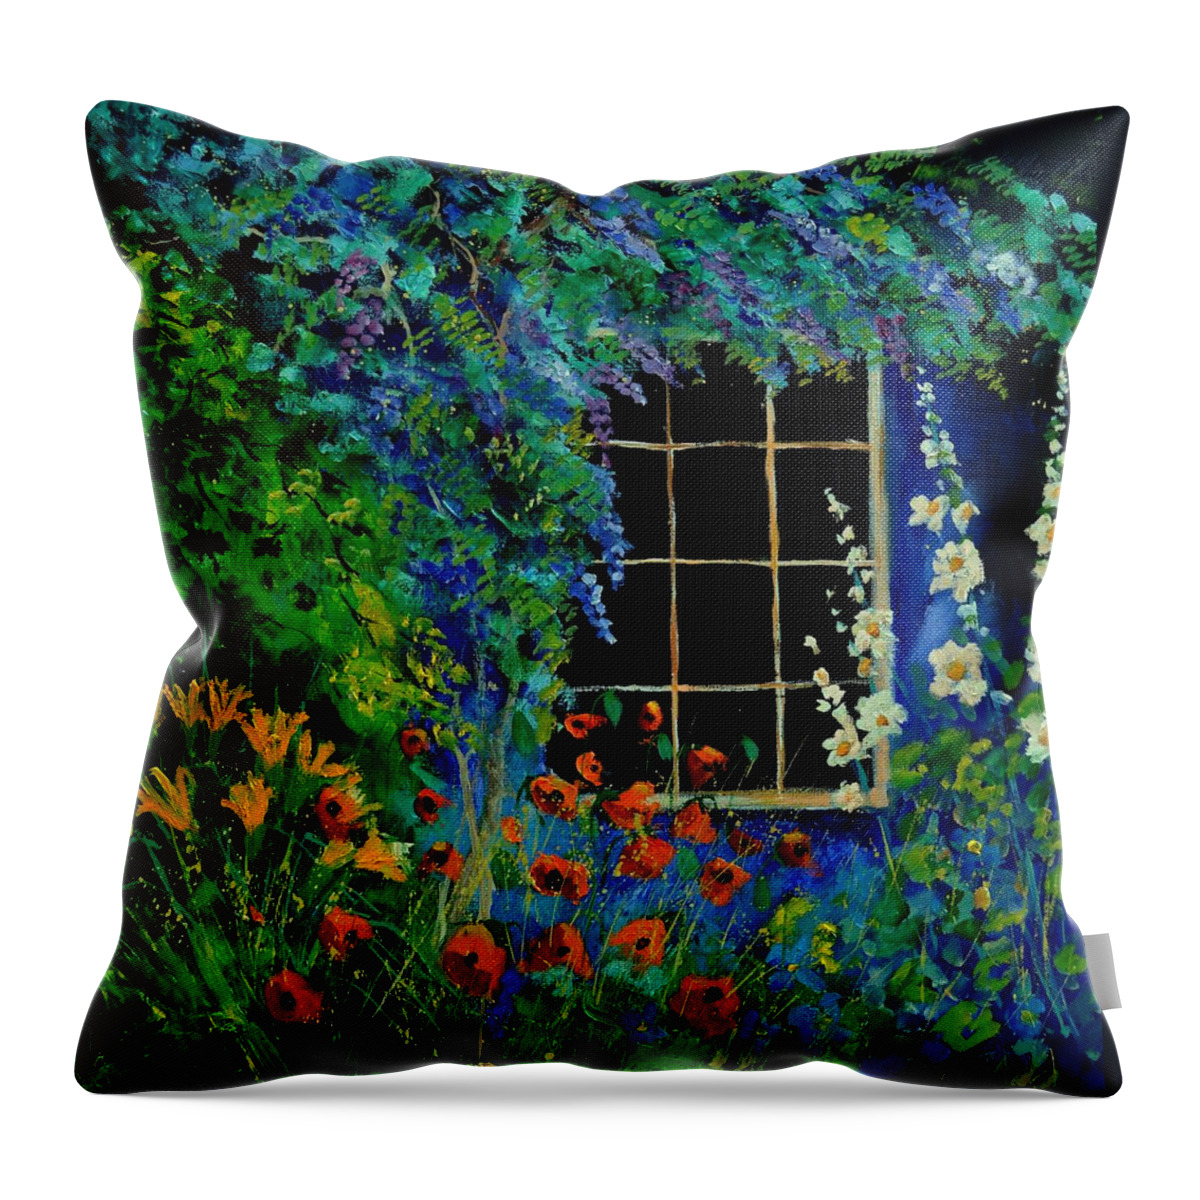 Flowers Throw Pillow featuring the painting Garden 88 by Pol Ledent